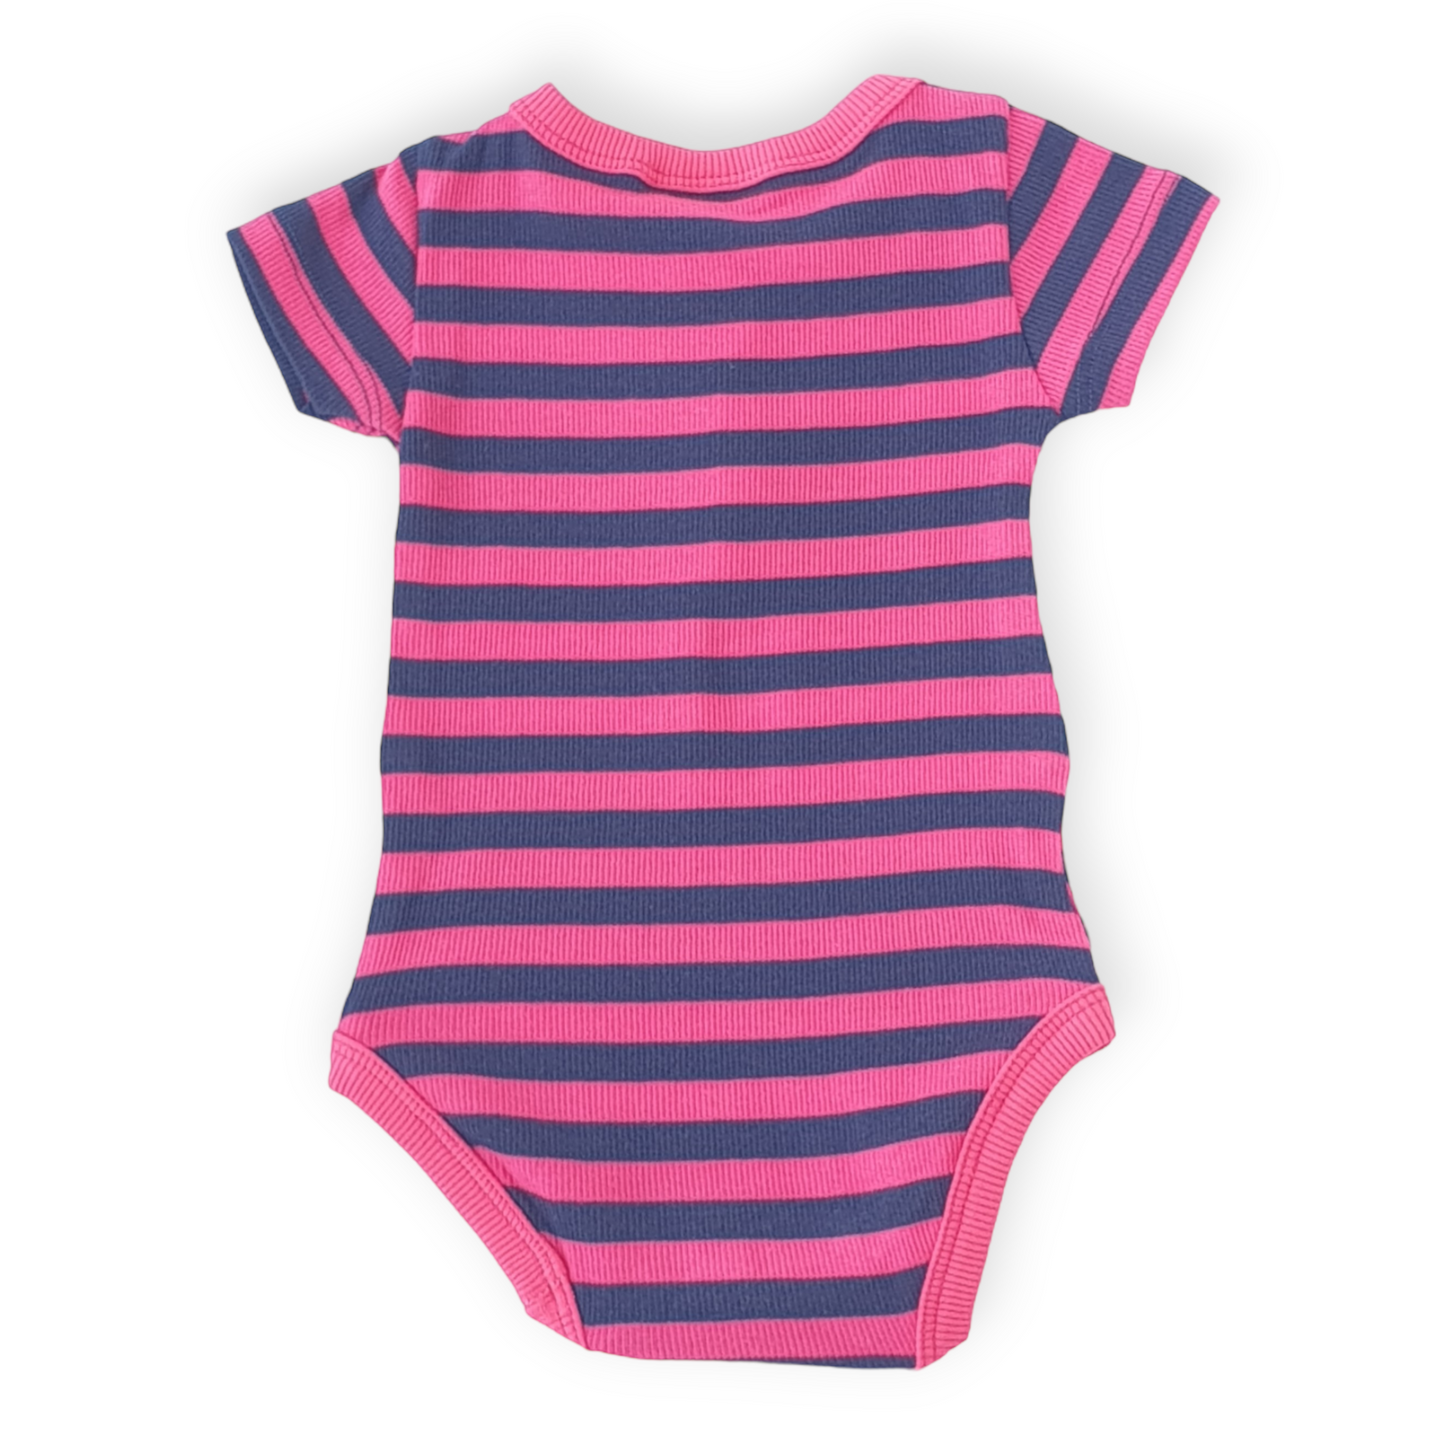 Striped Pink and Black Body